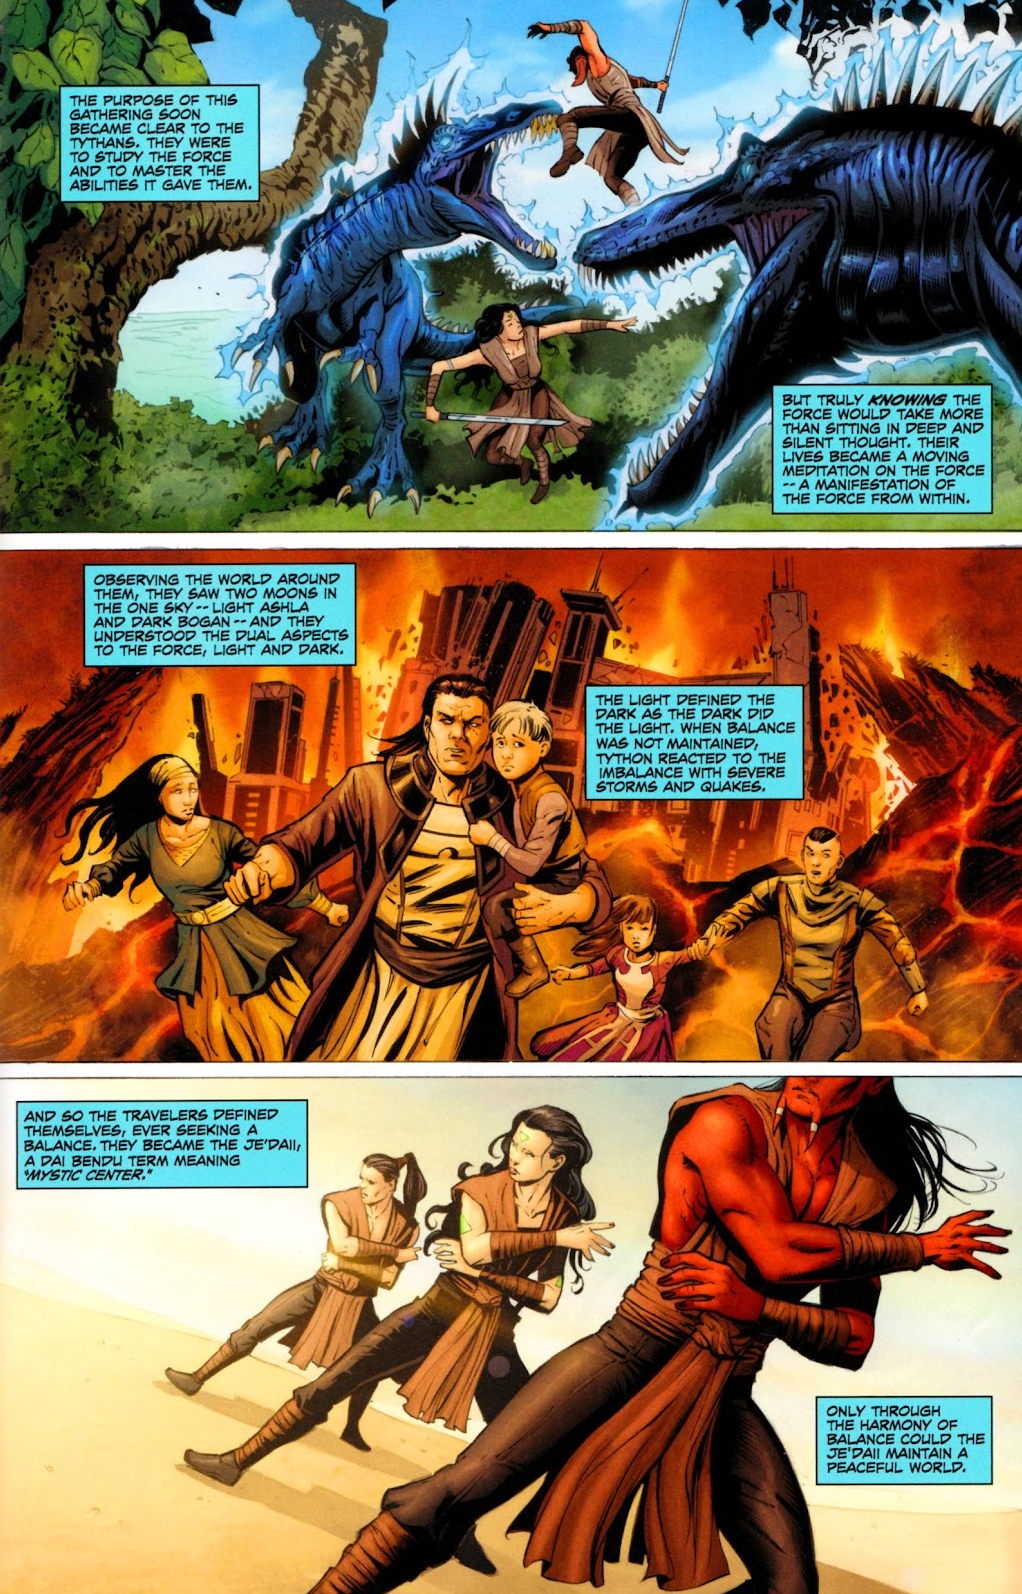 The earliest incarnation of the Jedi Order, the Je'daii, come to understand their relationship with The Force in Star Wars: Dawn of the Jedi - Force Storm Vol. 1 #1 (2012), Dark Horse Comics. Words by John Ostrander, art by Jan Duursema, Dan Parsons, Wes Dzioba, and Michael Heisler.